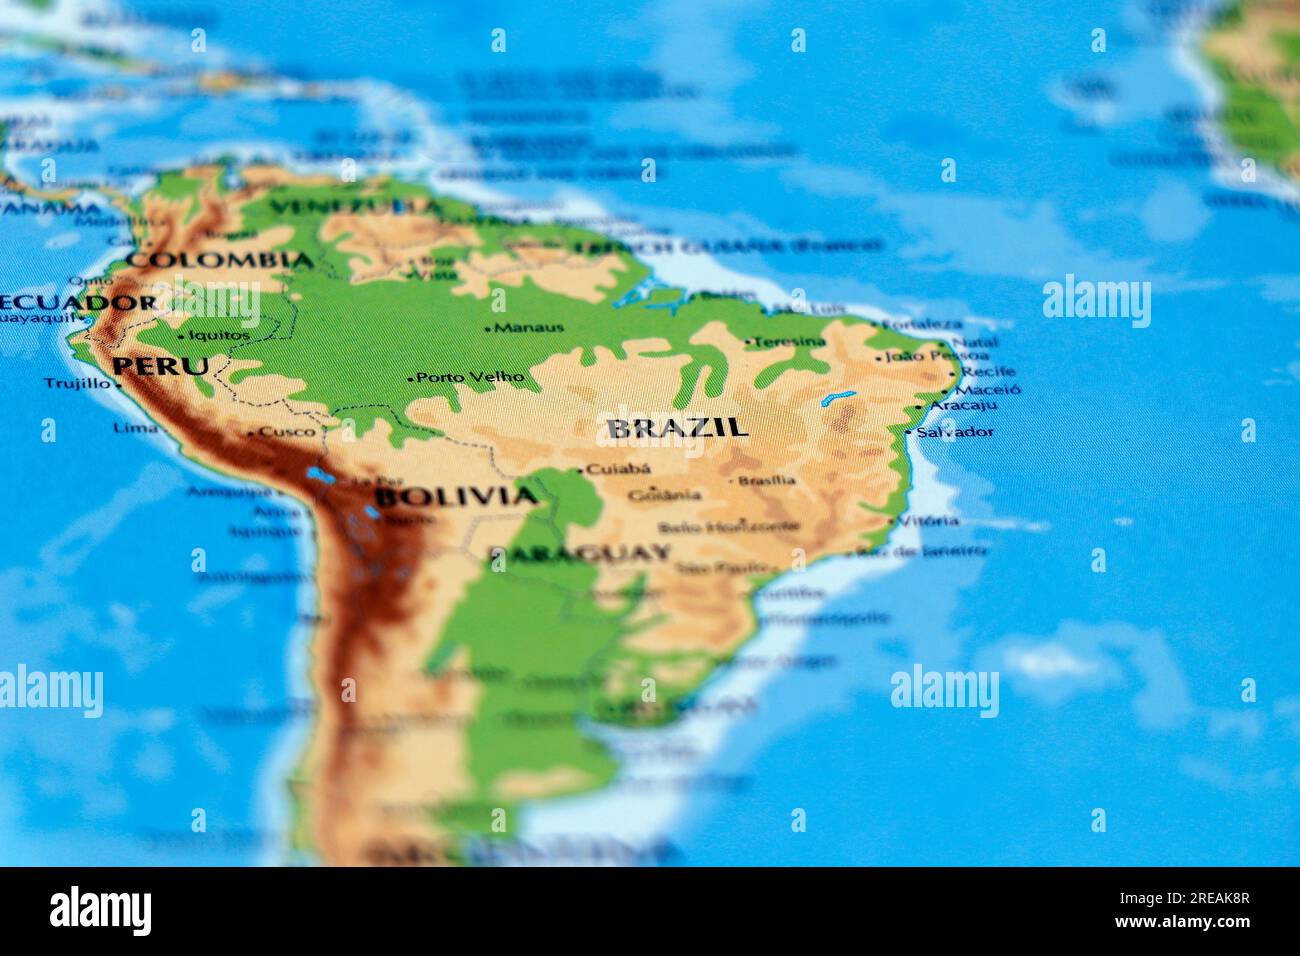 world map of south american countries and brazil, colombia, peru in close up focus Stock Photo